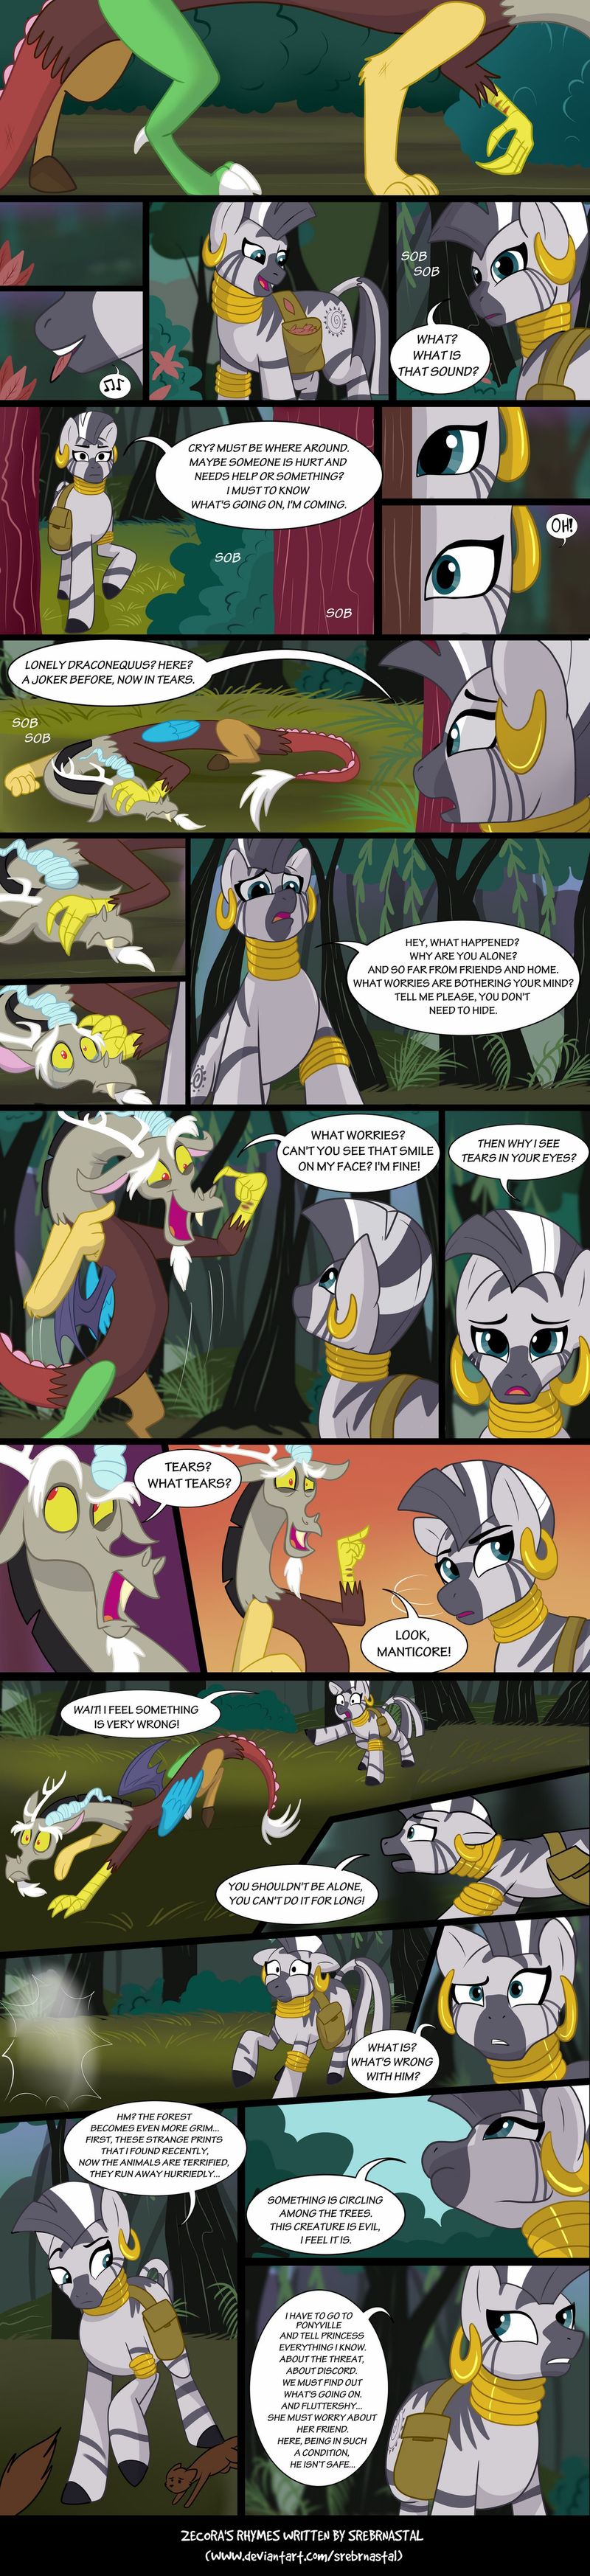 Page 49-51: Meeting in the woods